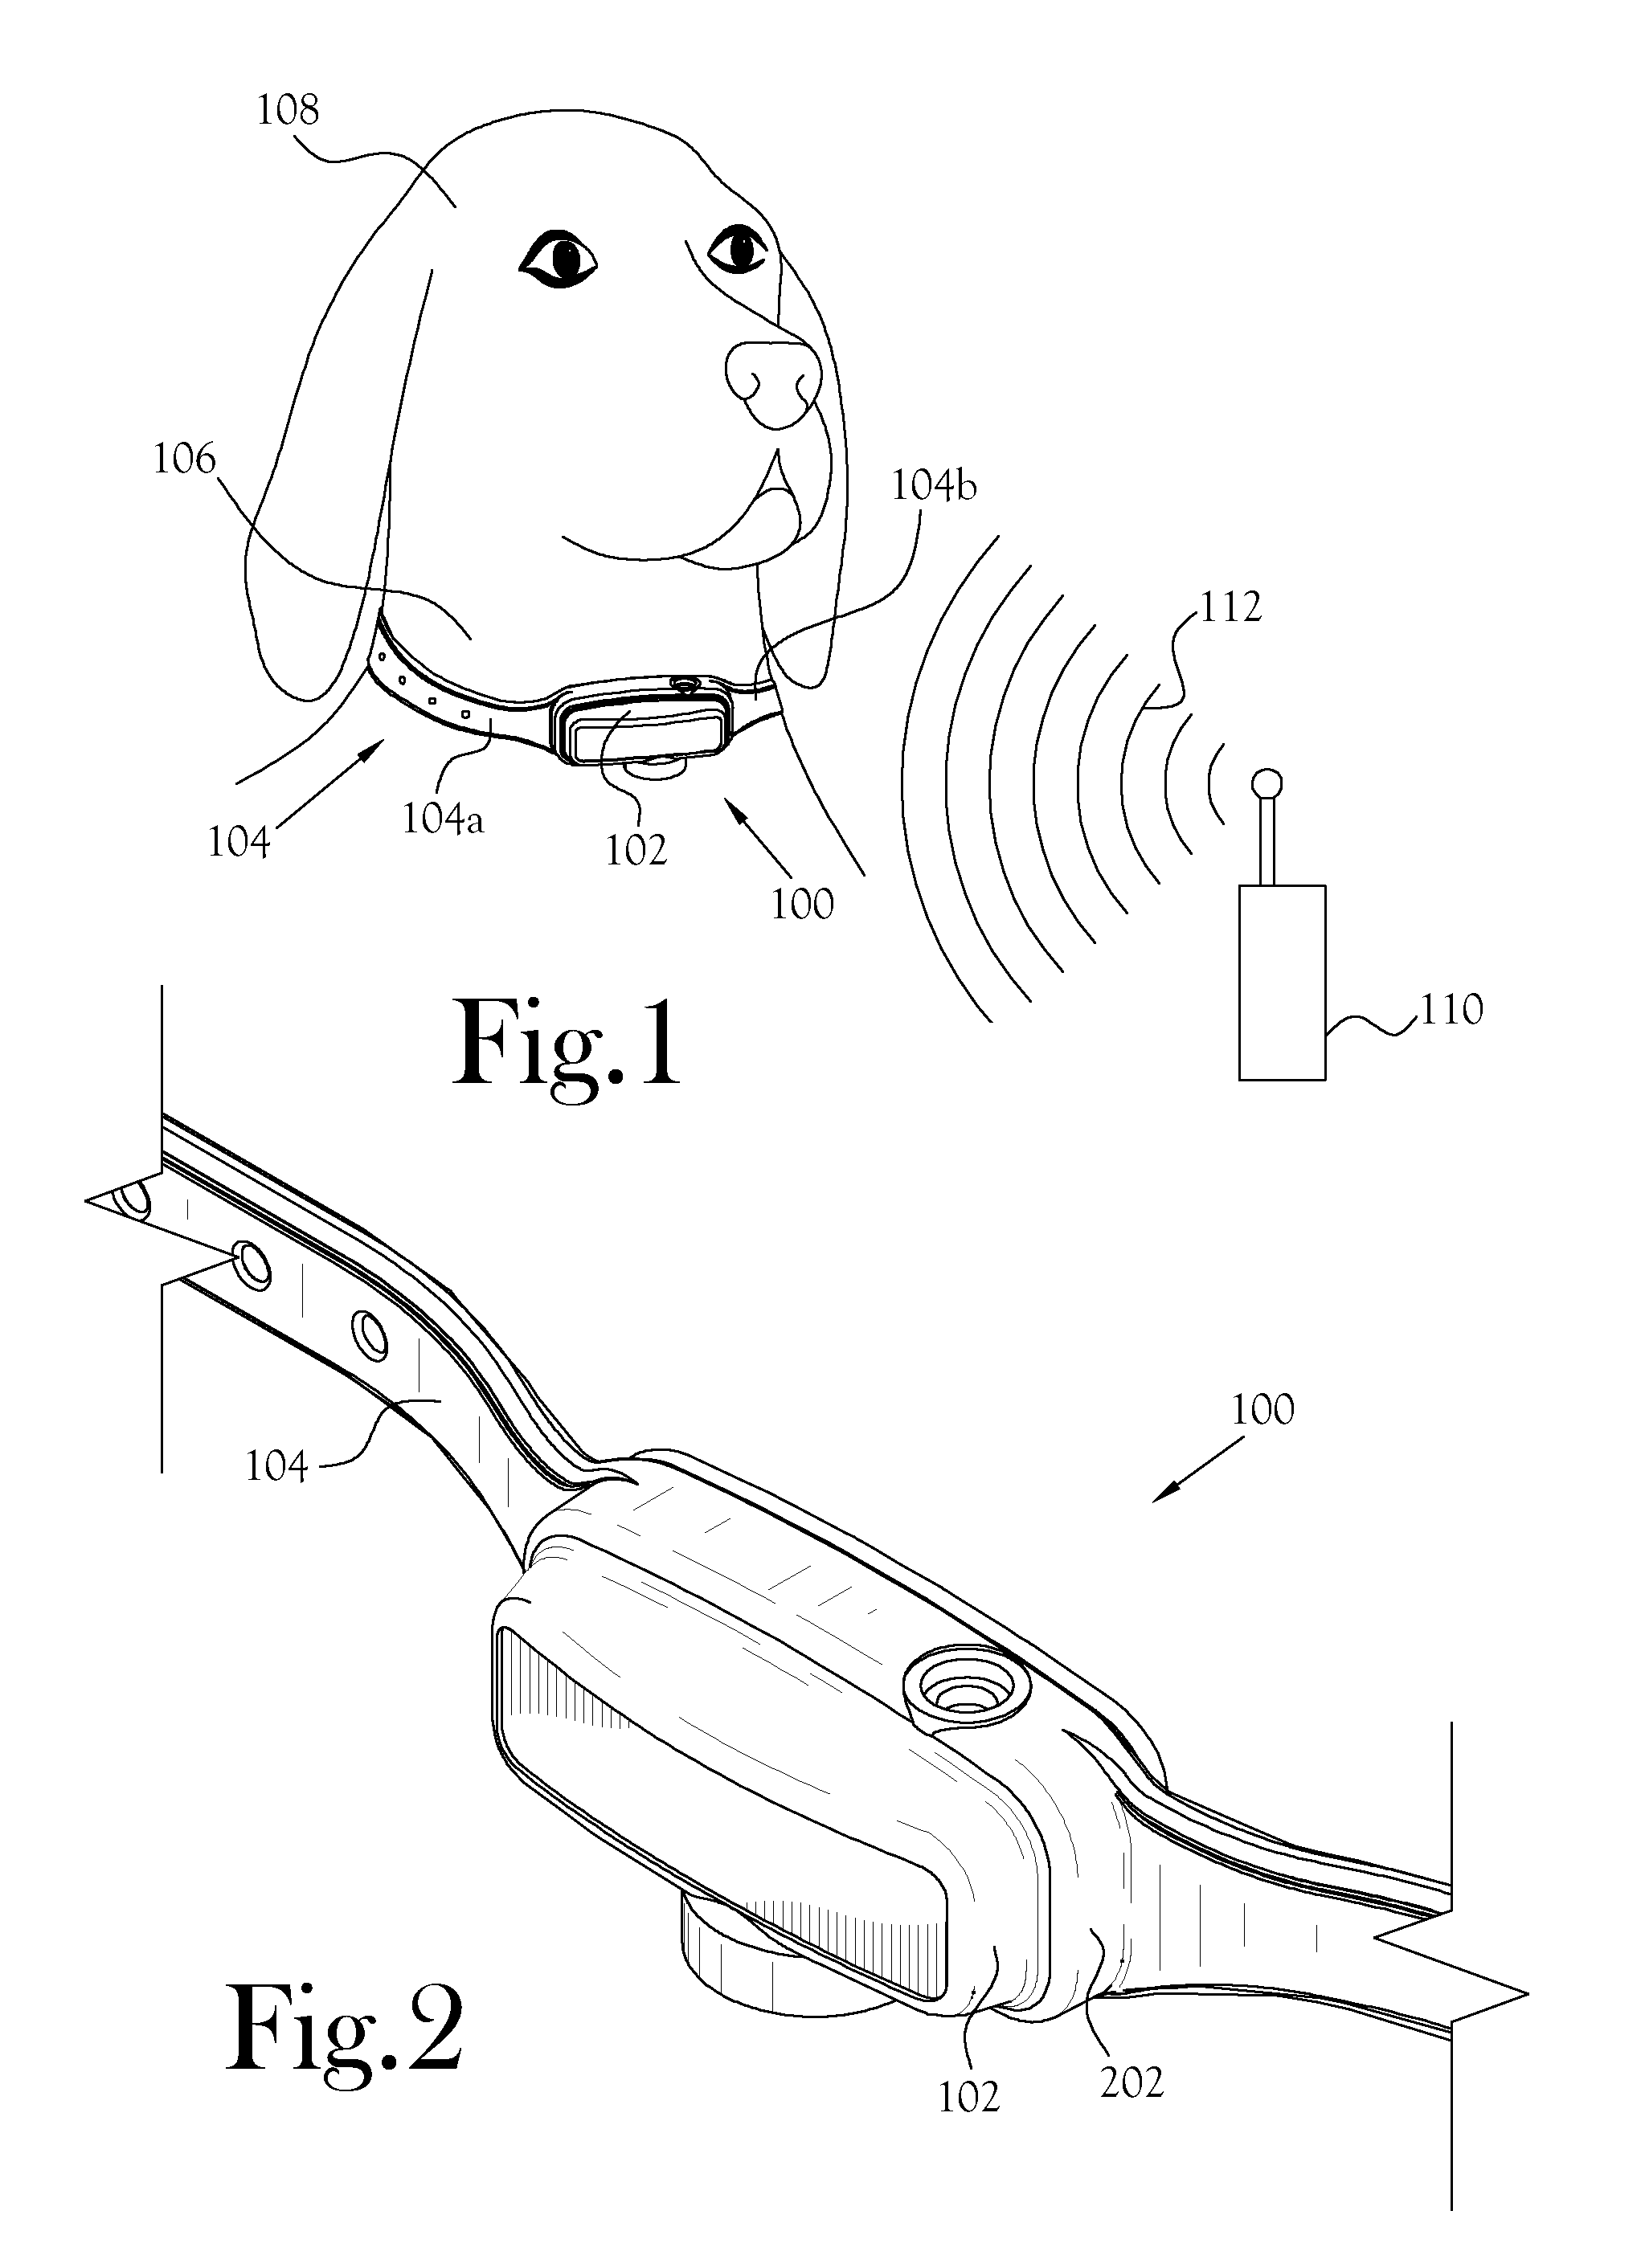 Antenna enclosed within an animal training apparatus